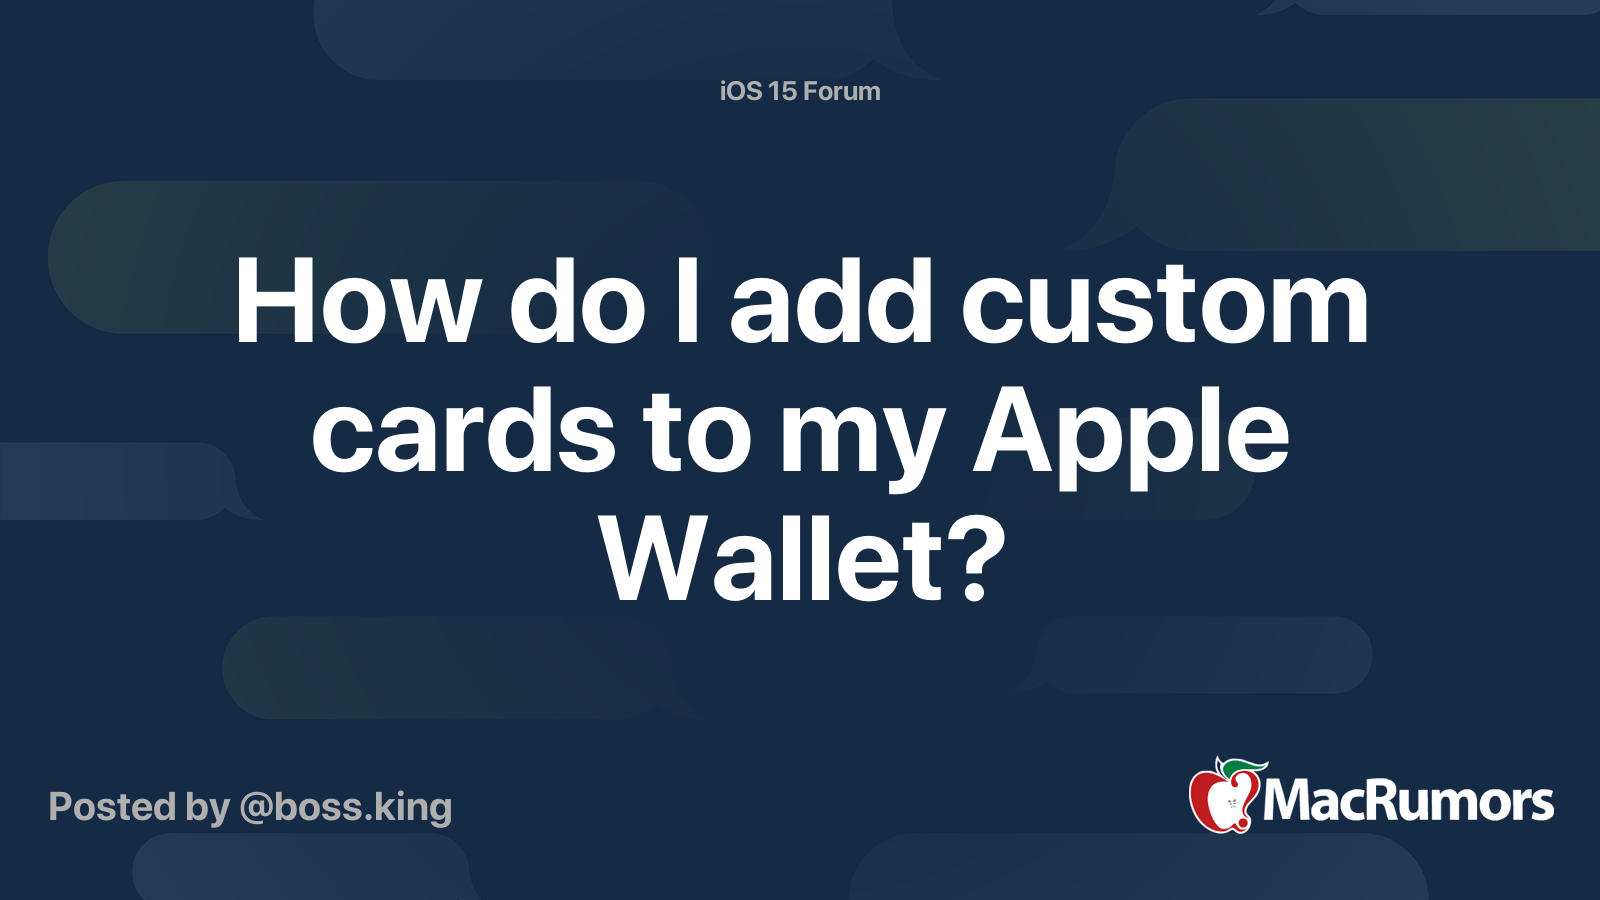 how-do-i-add-custom-cards-to-my-apple-wallet-macrumors-forums